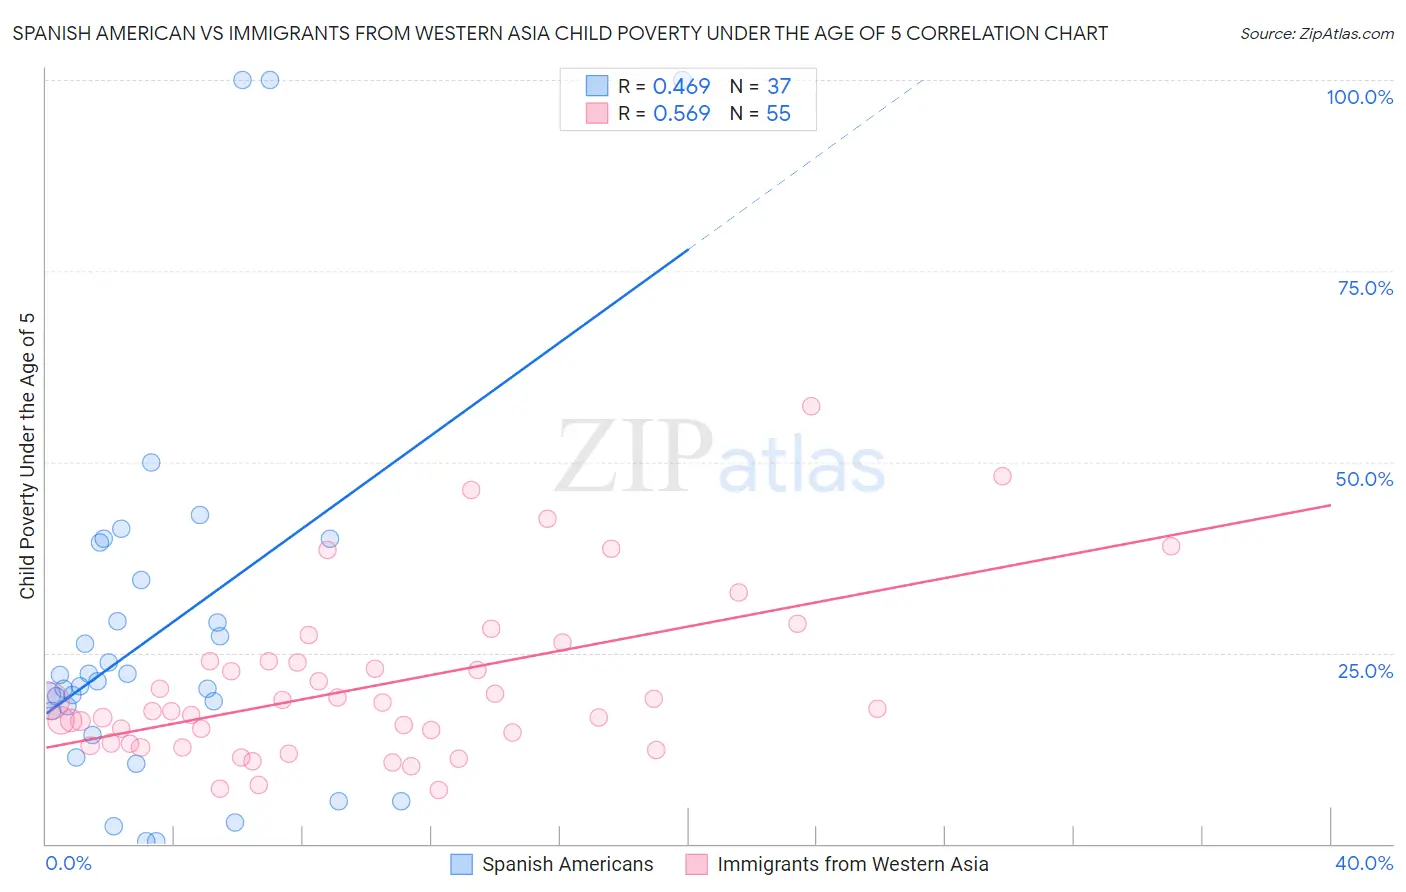 Spanish American vs Immigrants from Western Asia Child Poverty Under the Age of 5